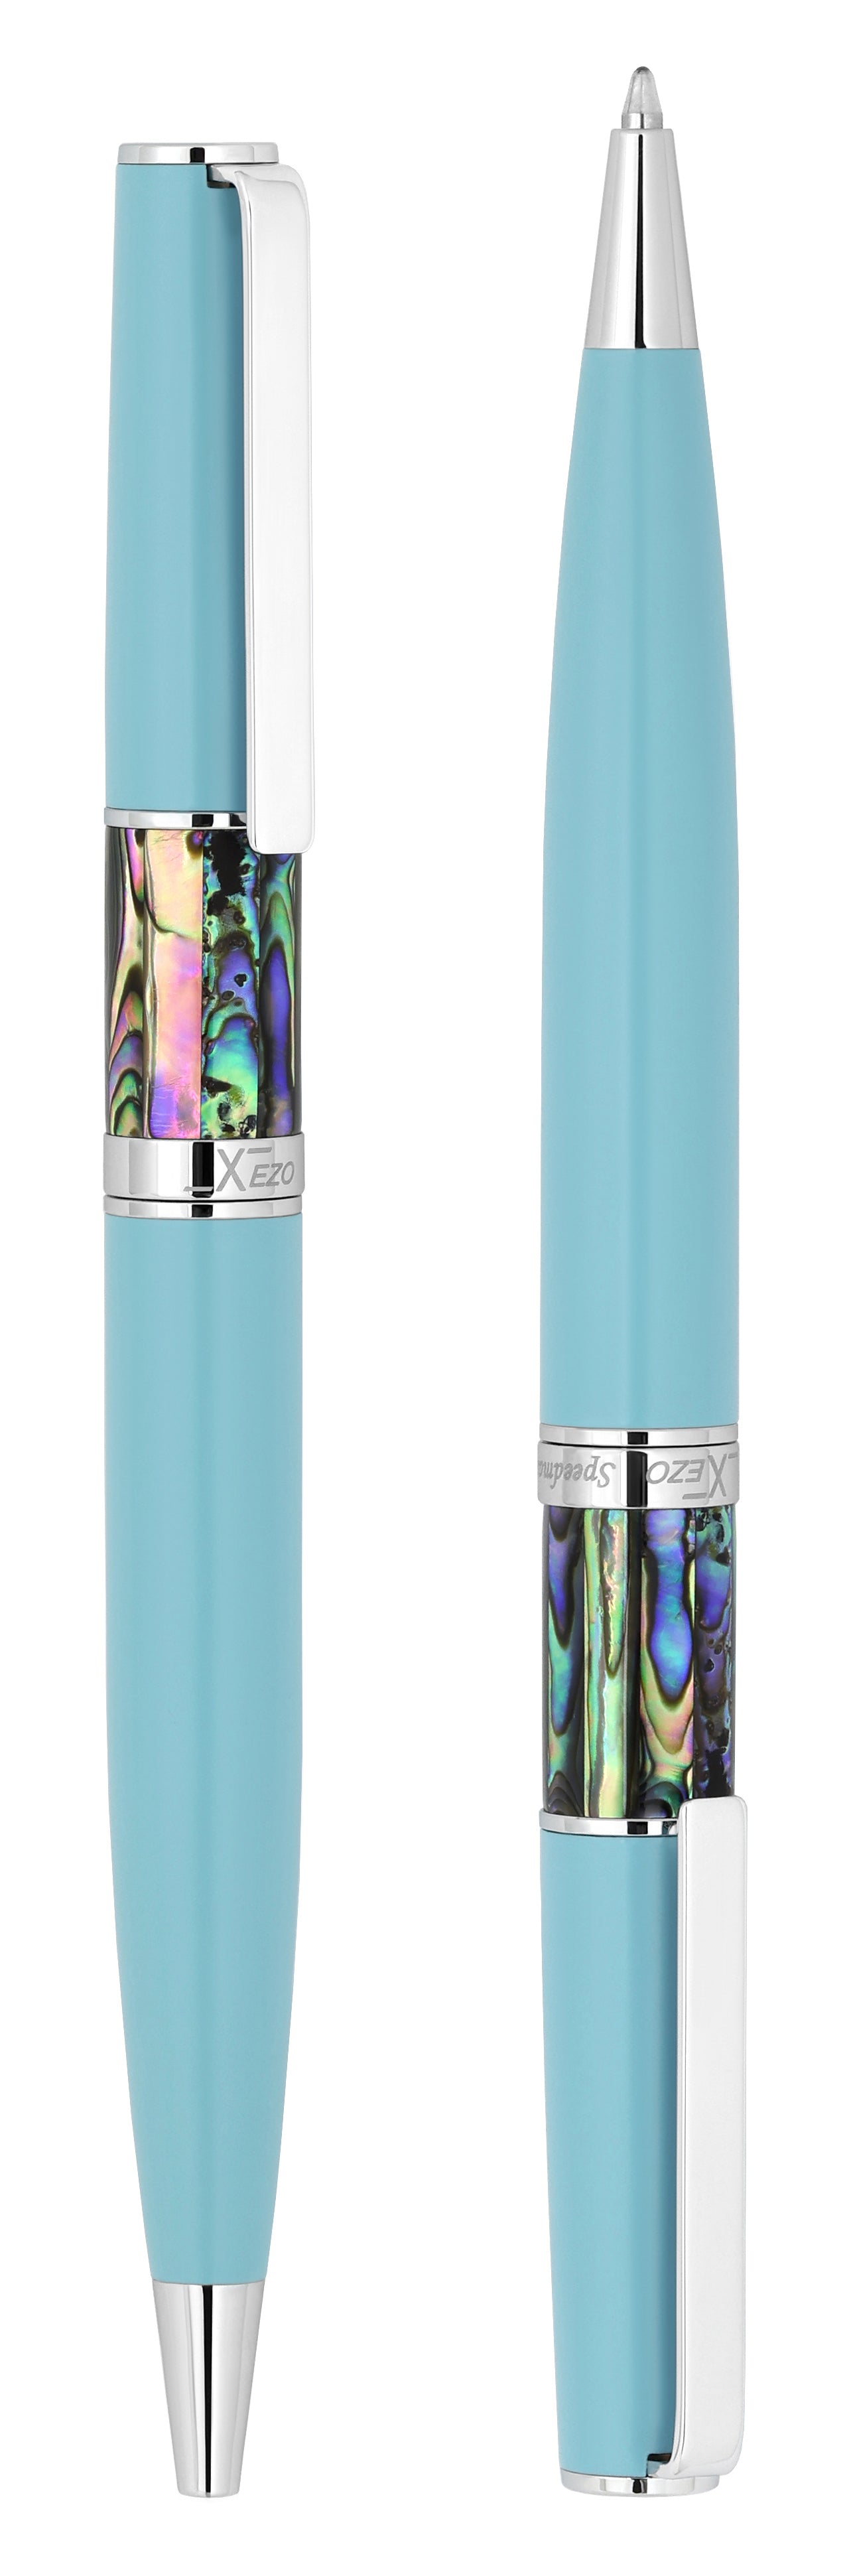 Xezo - Vertical view of two Speed Master Sky Blue B-AC Fountain pens; the one on the left is capped, and the one on the right is uncapped